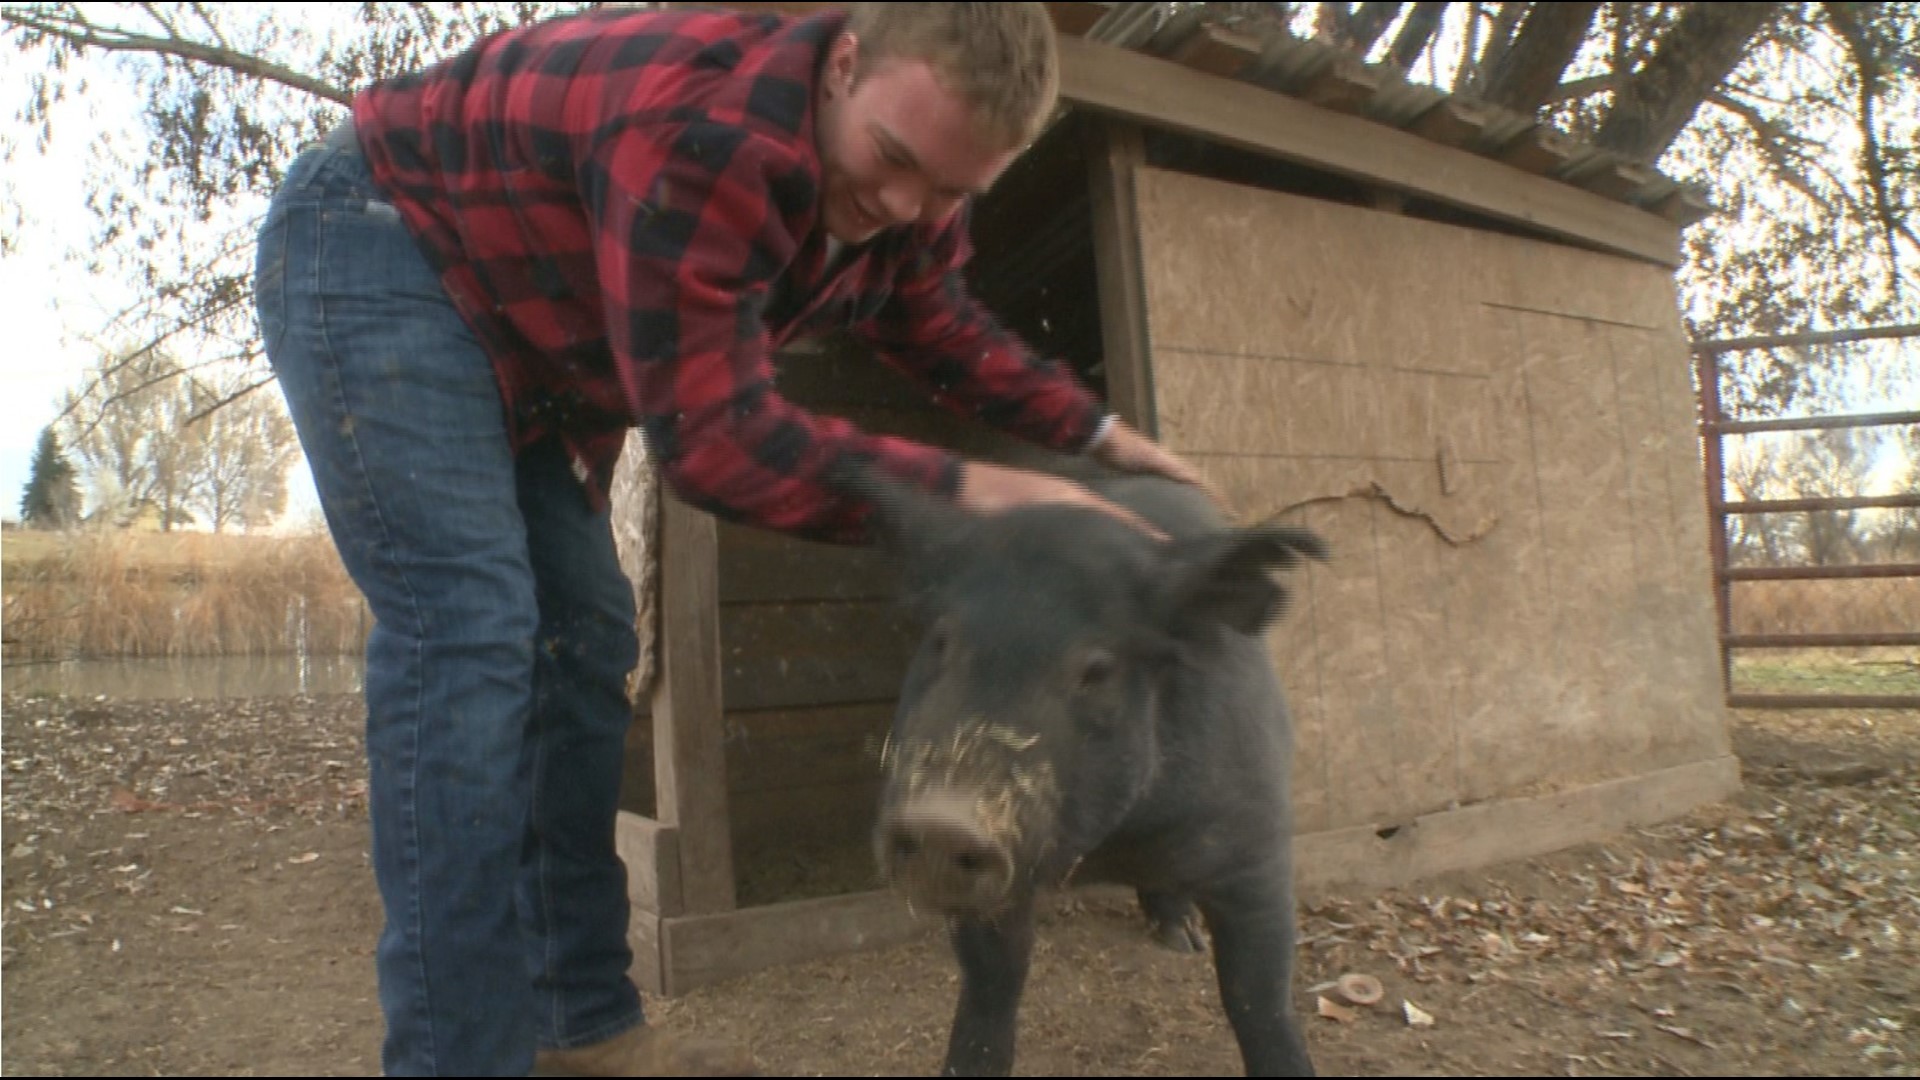 Caden Dollar has worked on a nearby farm in Fort Collins for the last decade, 9NEWS's Scotty Gabge caught up with him to reflect on his time working.